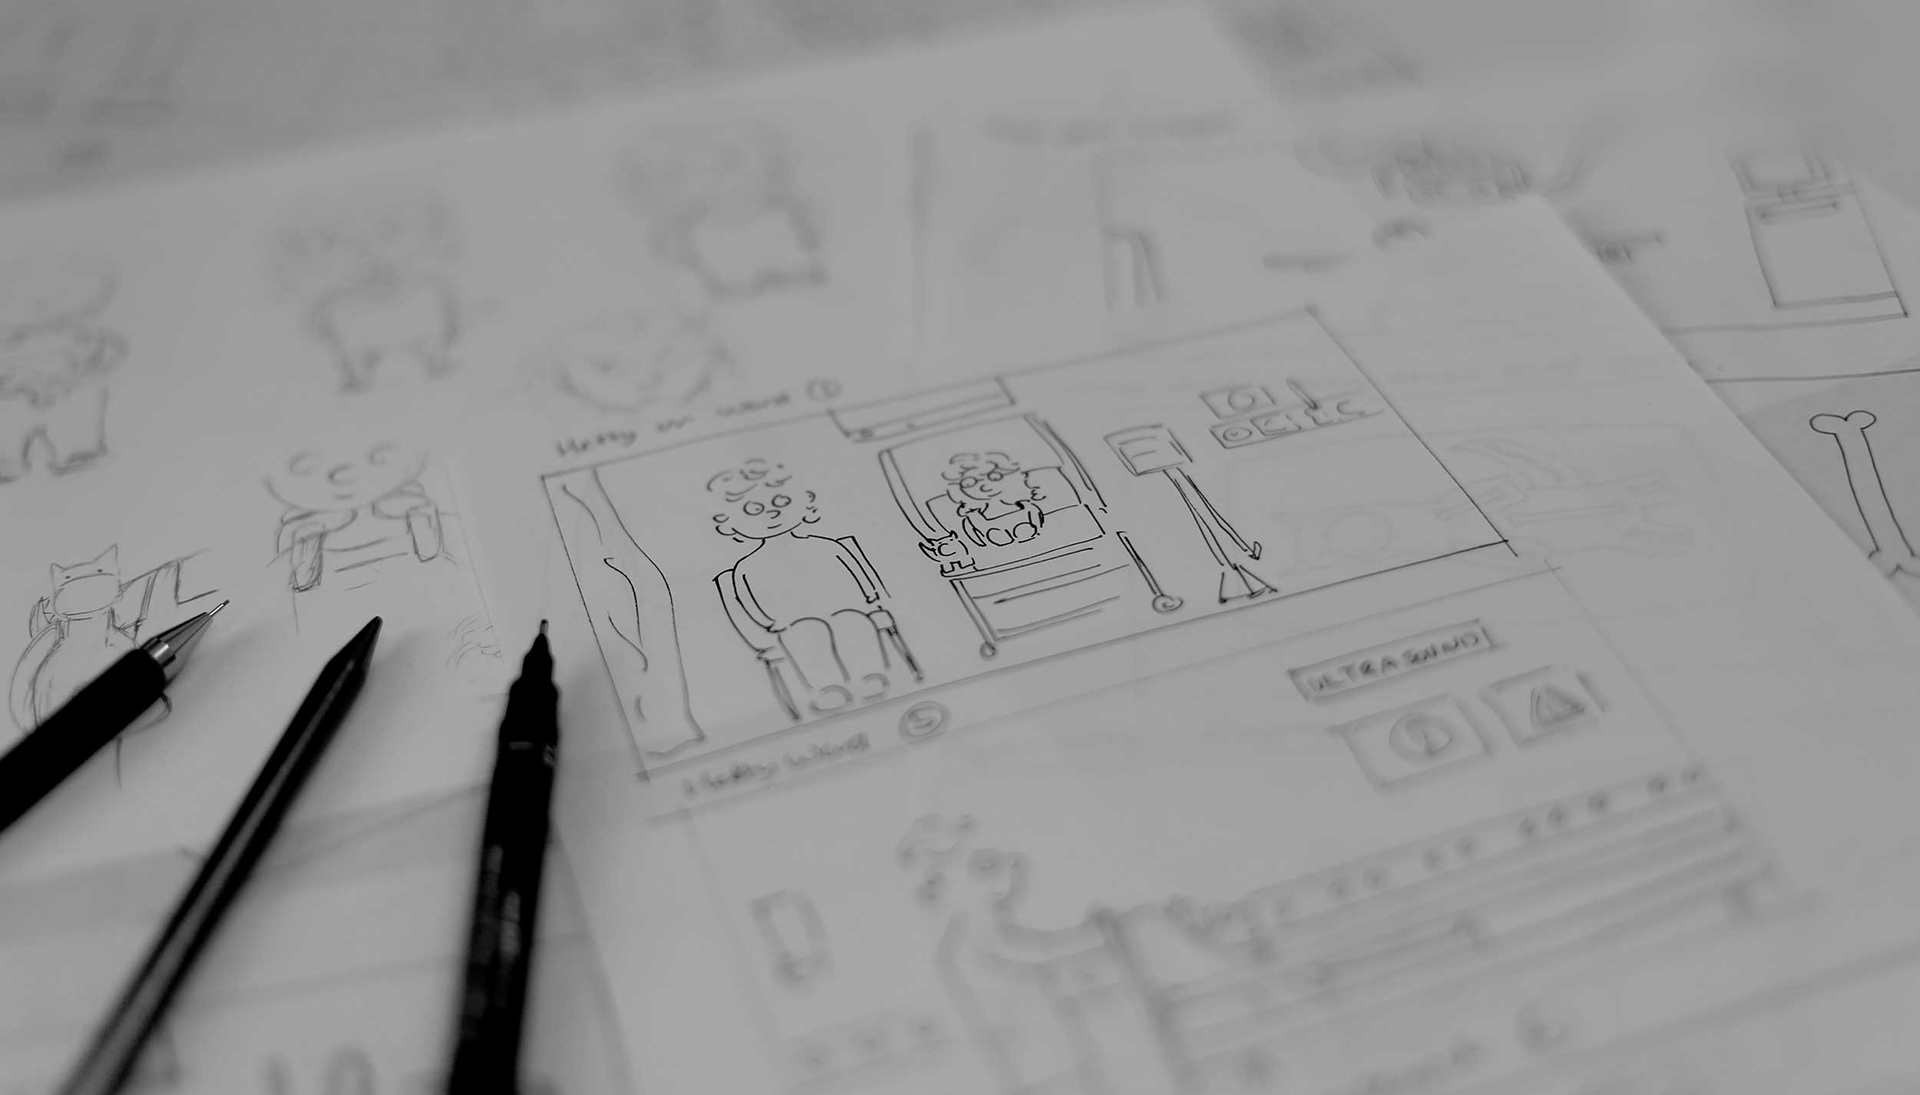 How it all began... concepting the app with pen and paper